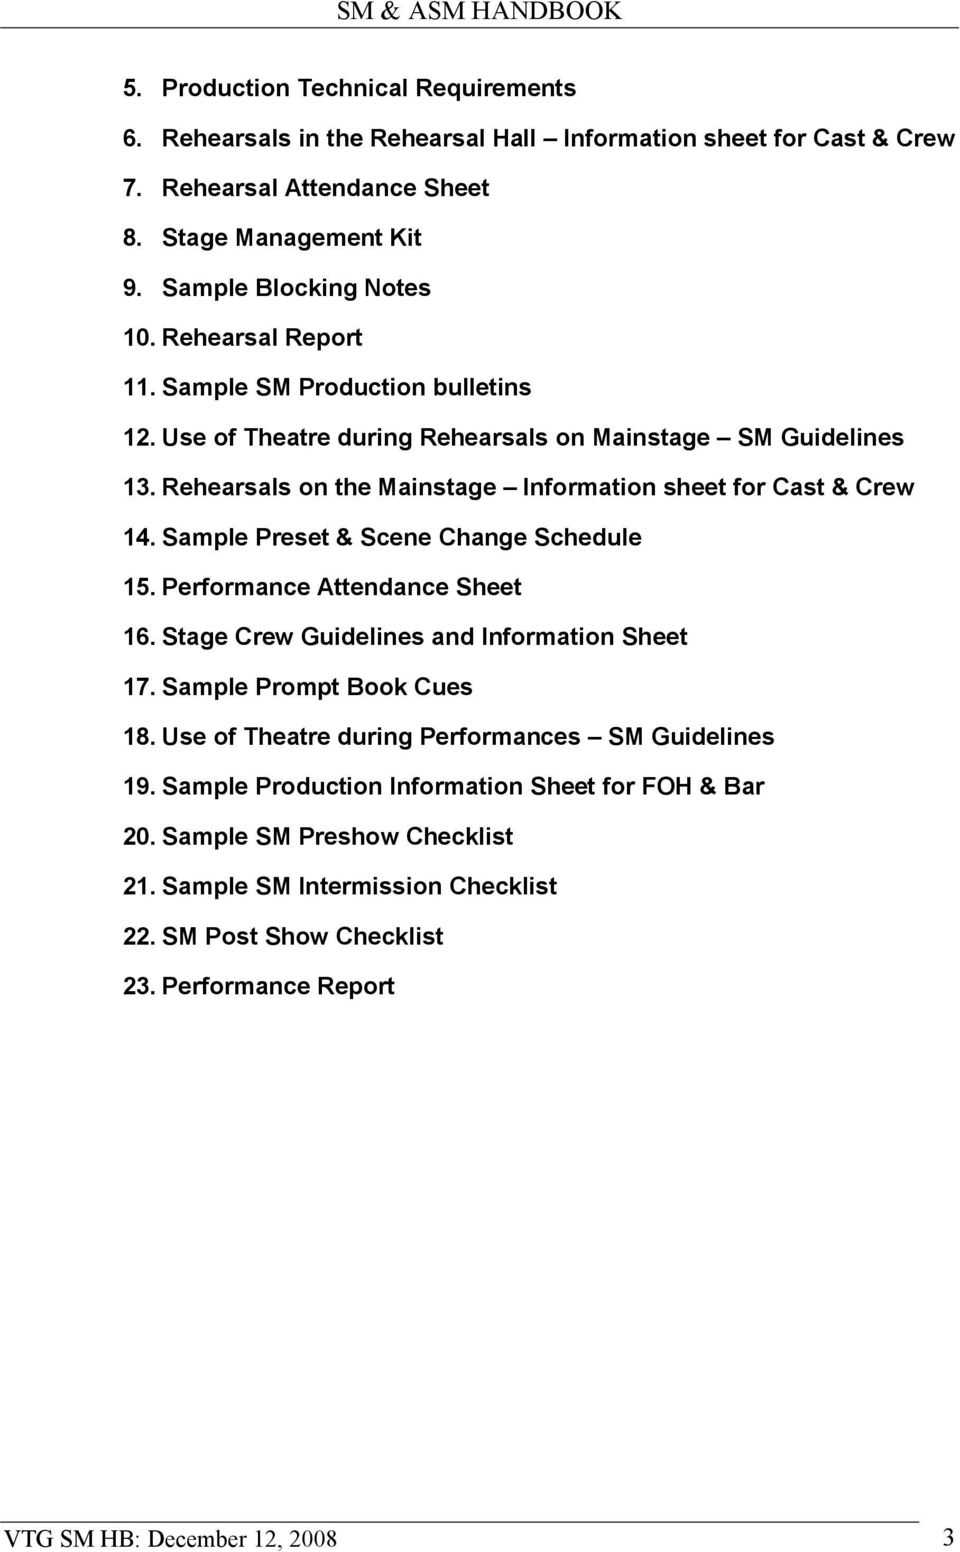 Stage Manager & Assistant Stage Manager Handbook – Pdf Free With Rehearsal Report Template